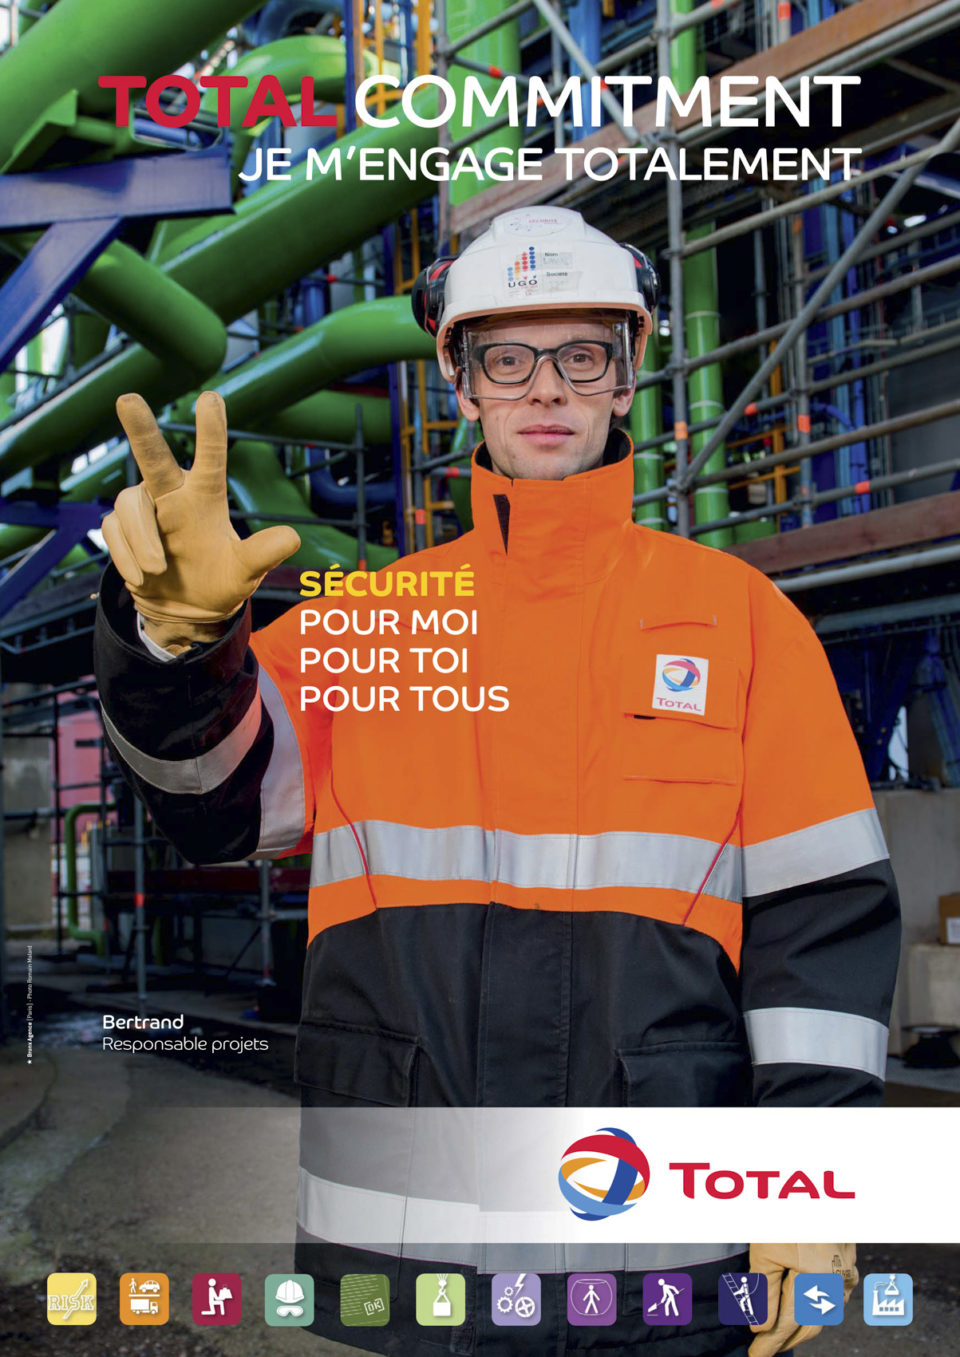 TOTAL, world day for safety campaign.